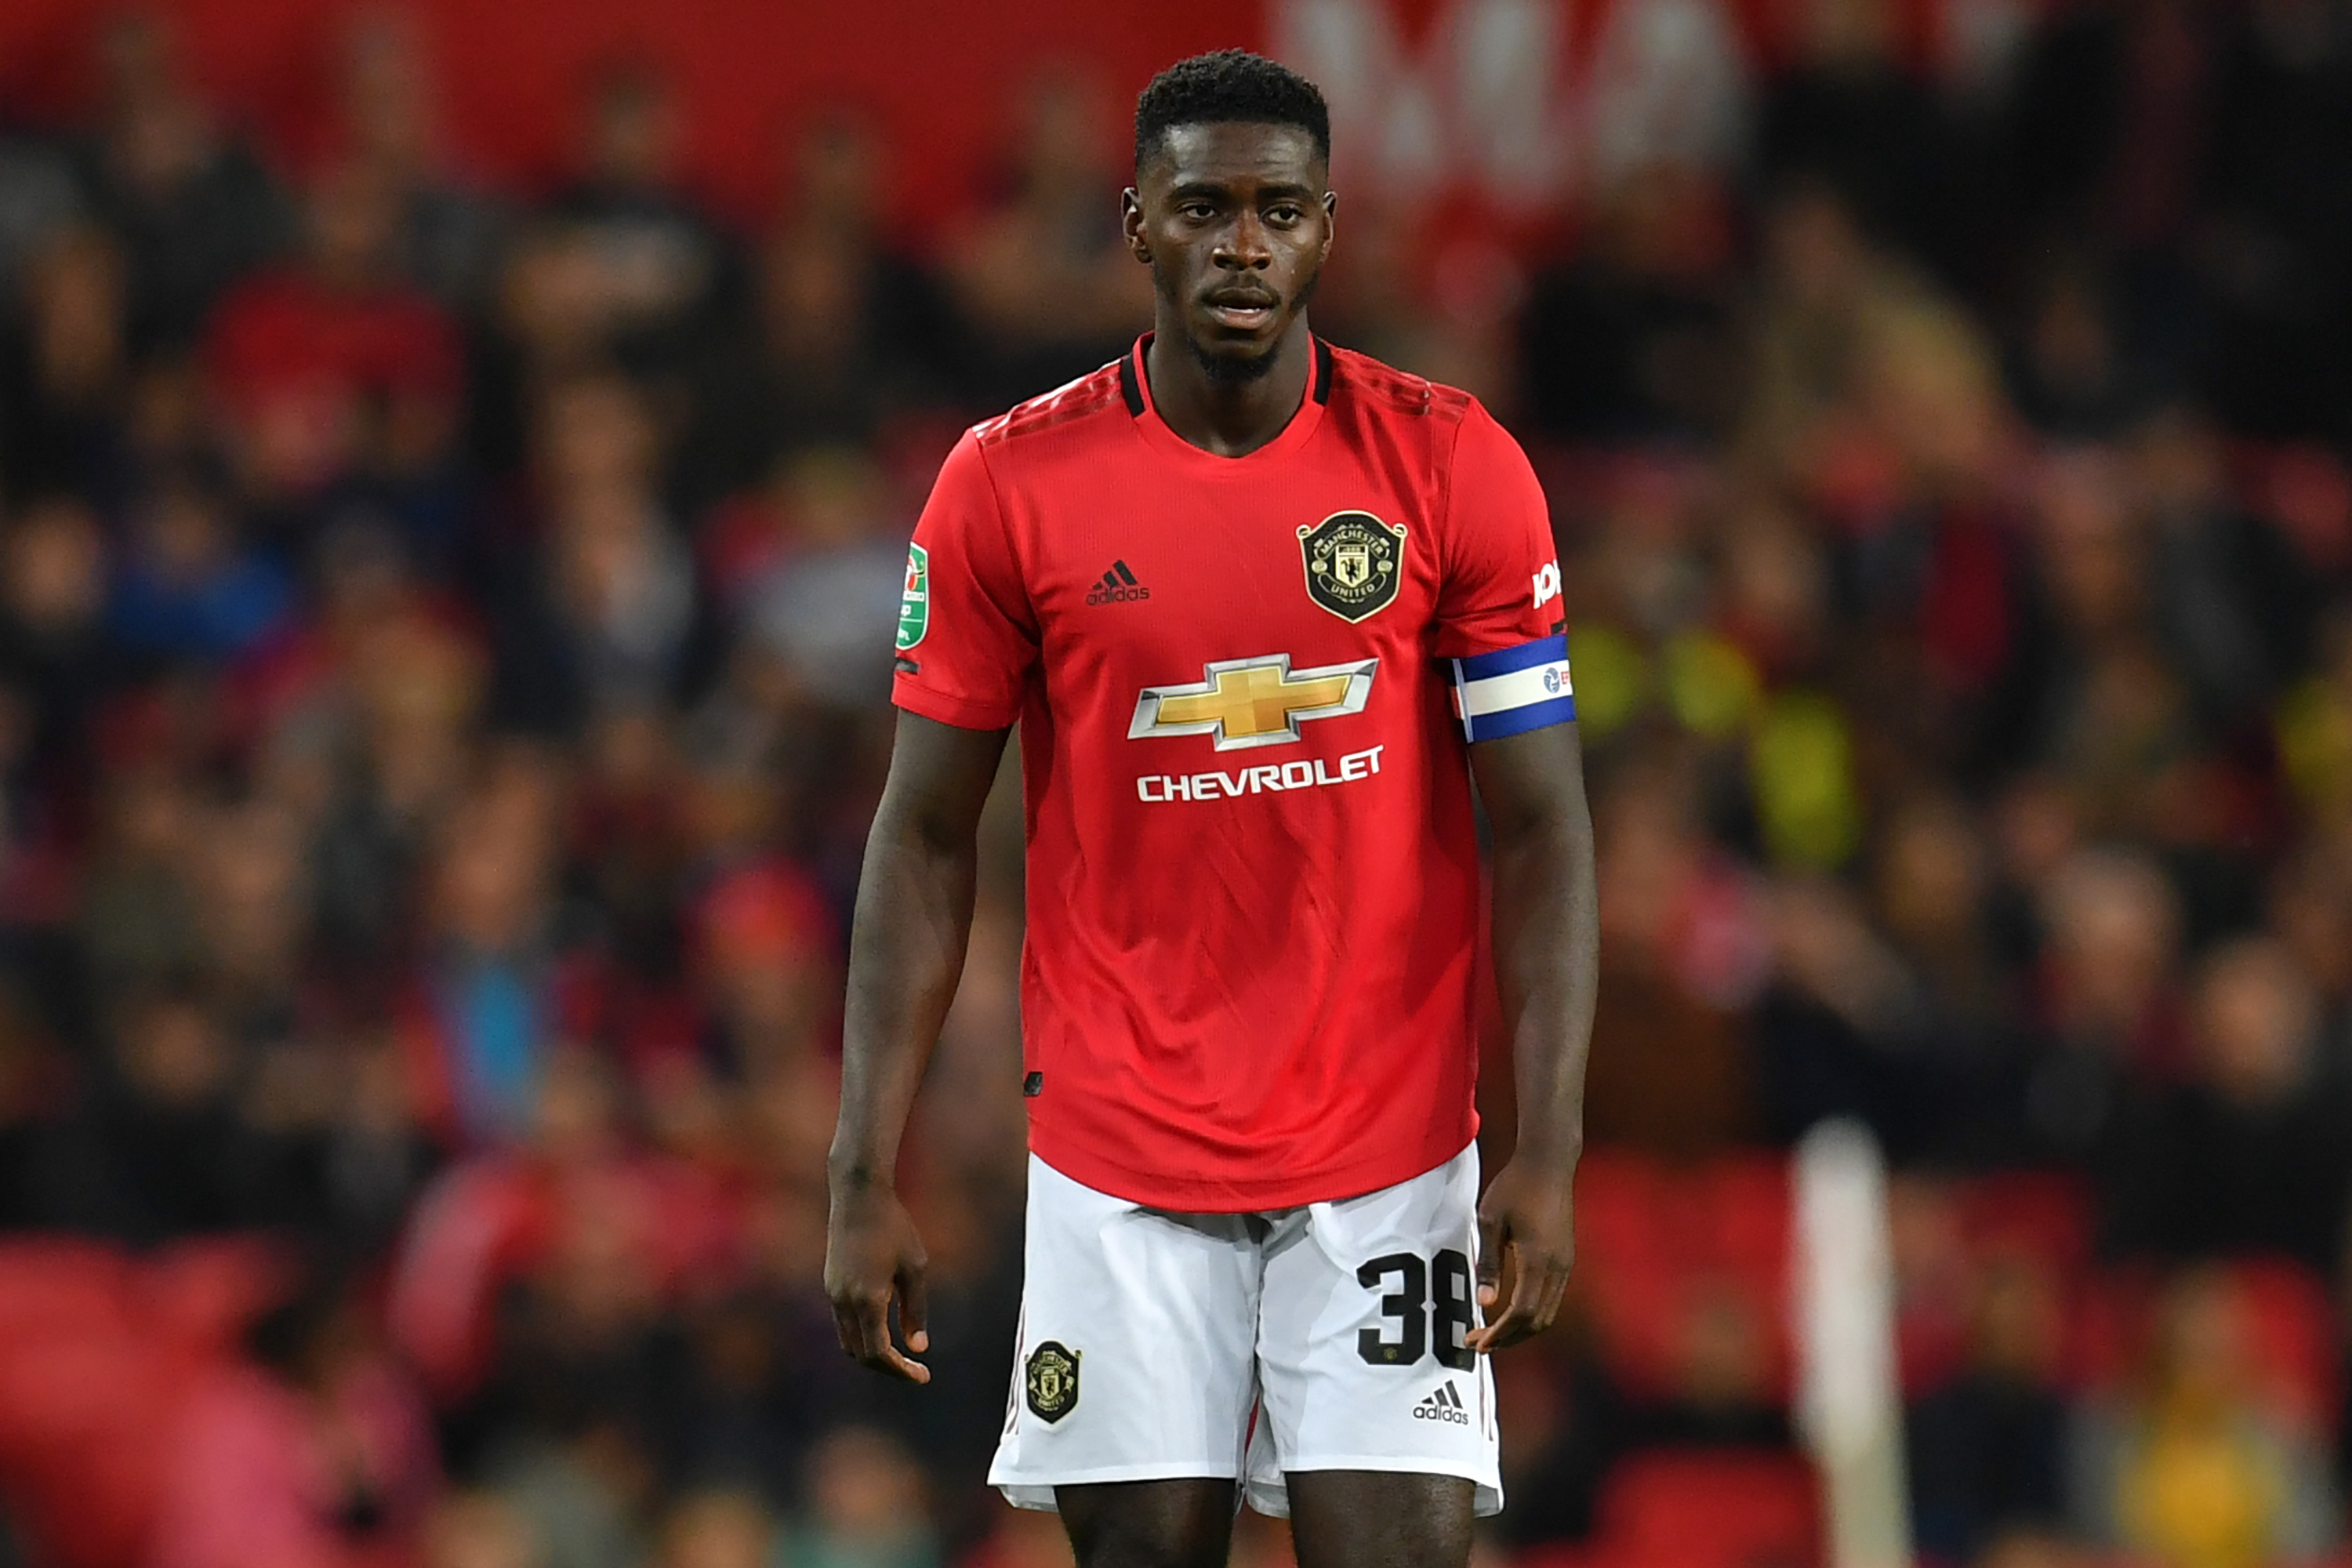 Axel Tuanzebe set for another loan stint? (Photo by Paul Ellis/AFP/Getty Images)